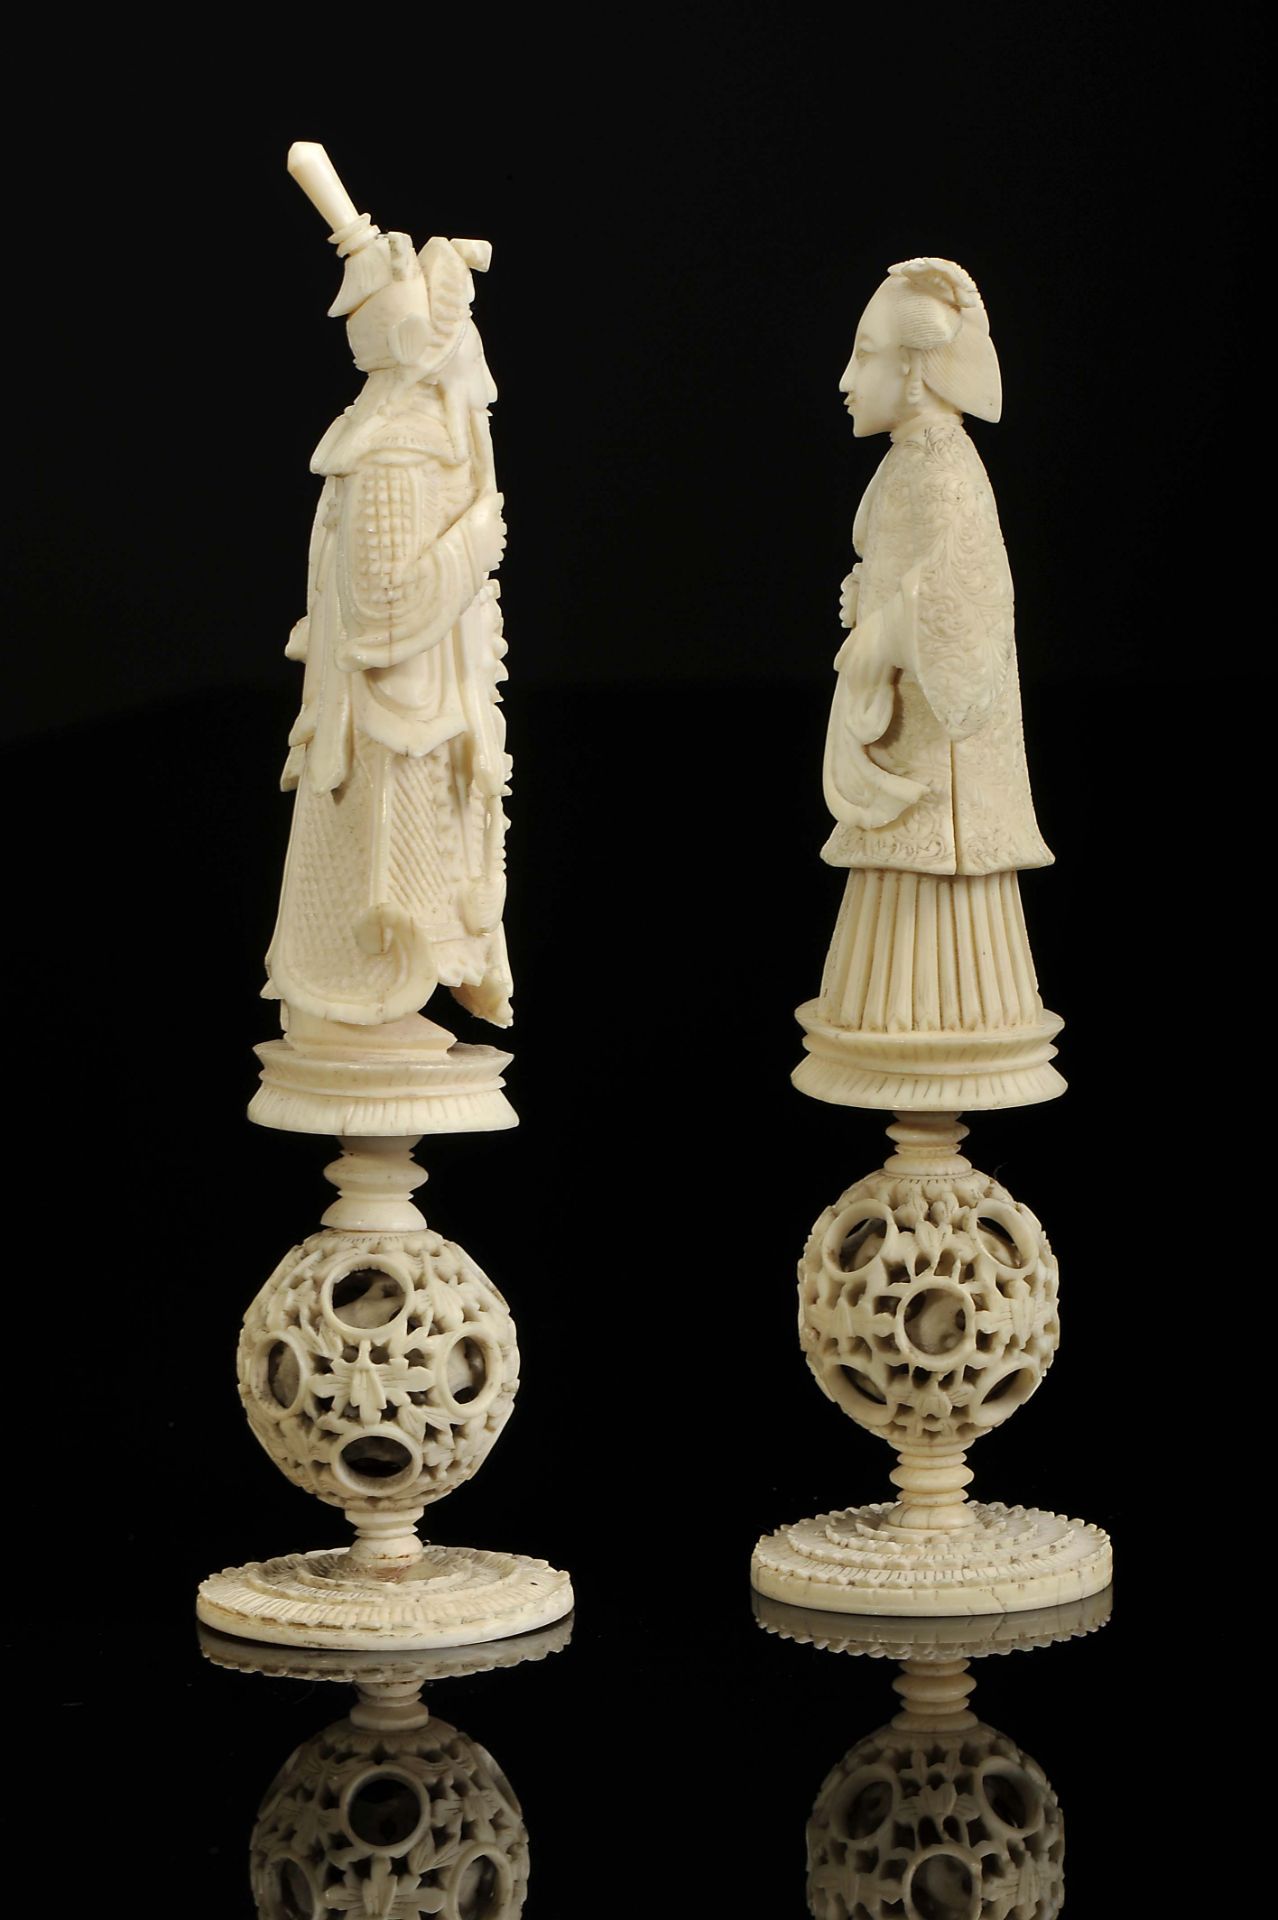 Six Chess Pieces, "Three Kings" and "Three Queens" on "Ball of happiness" - Image 5 of 7